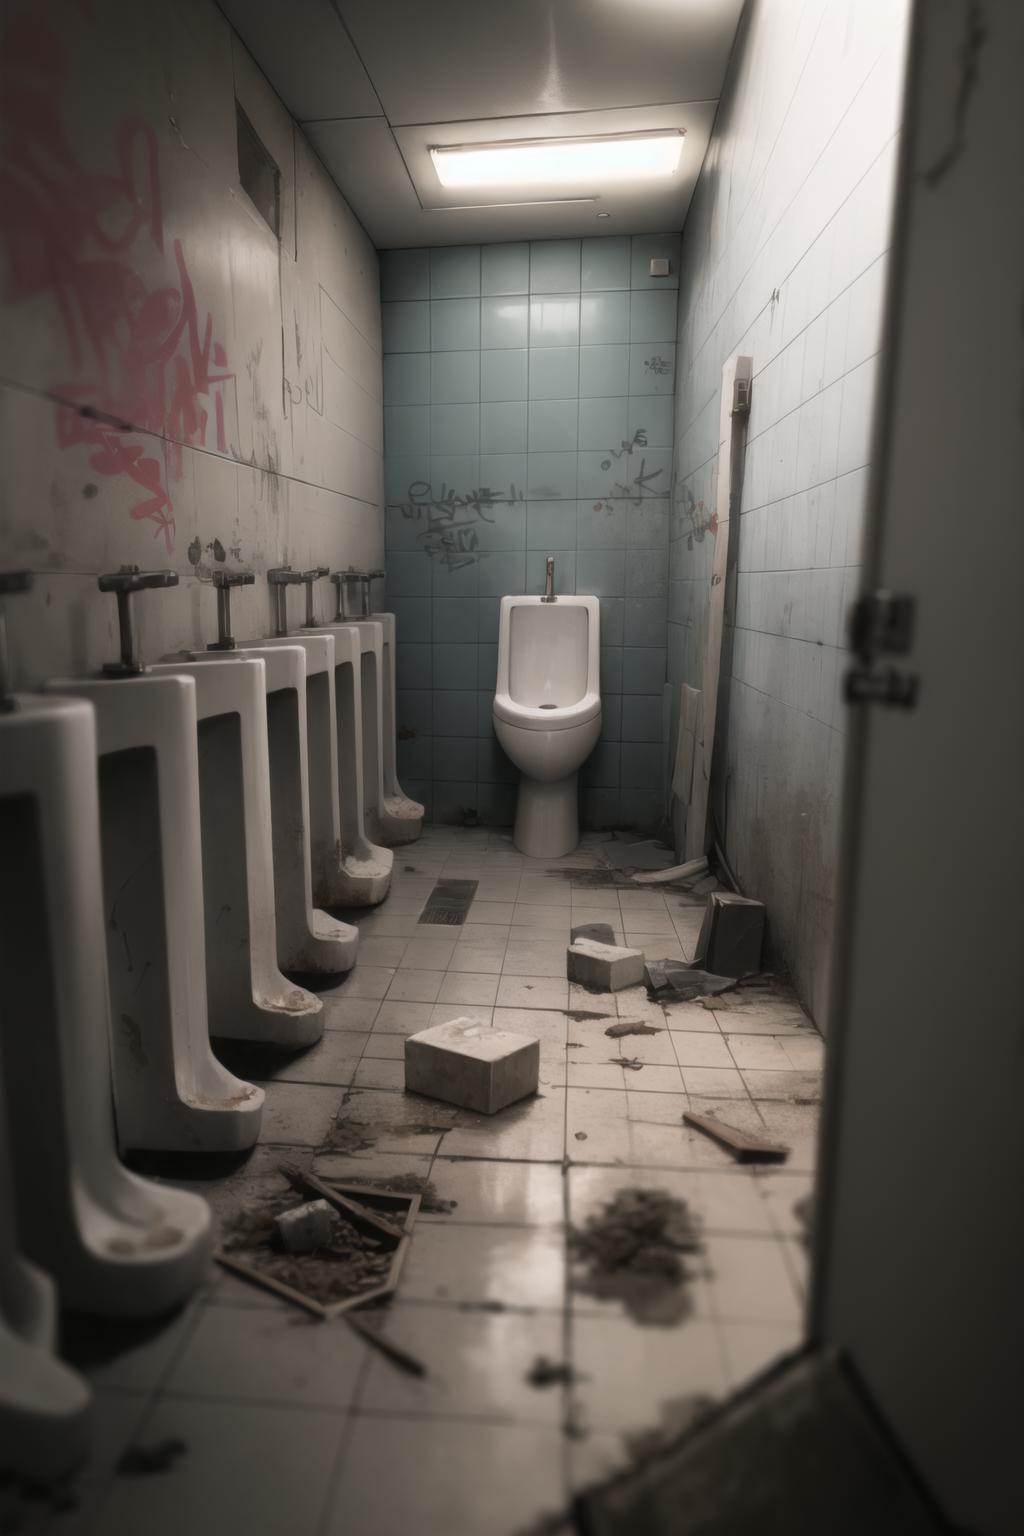 A dirty bathroom with graffiti and broken toilet.